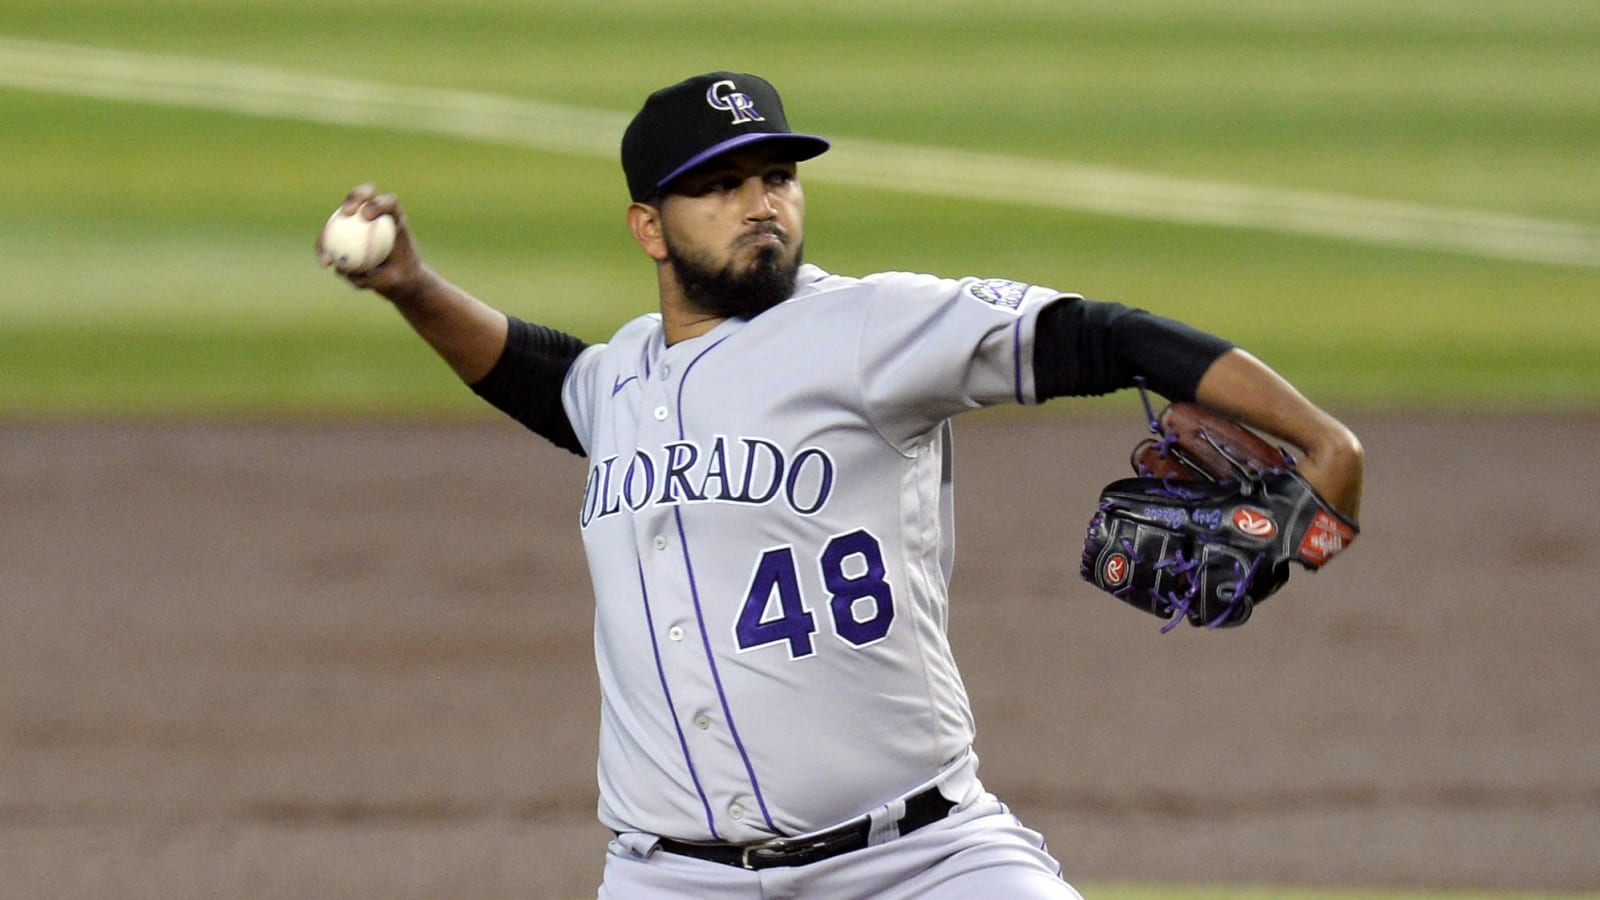 German Marquez is the Rockies’ top trade chip in a potential rebuild